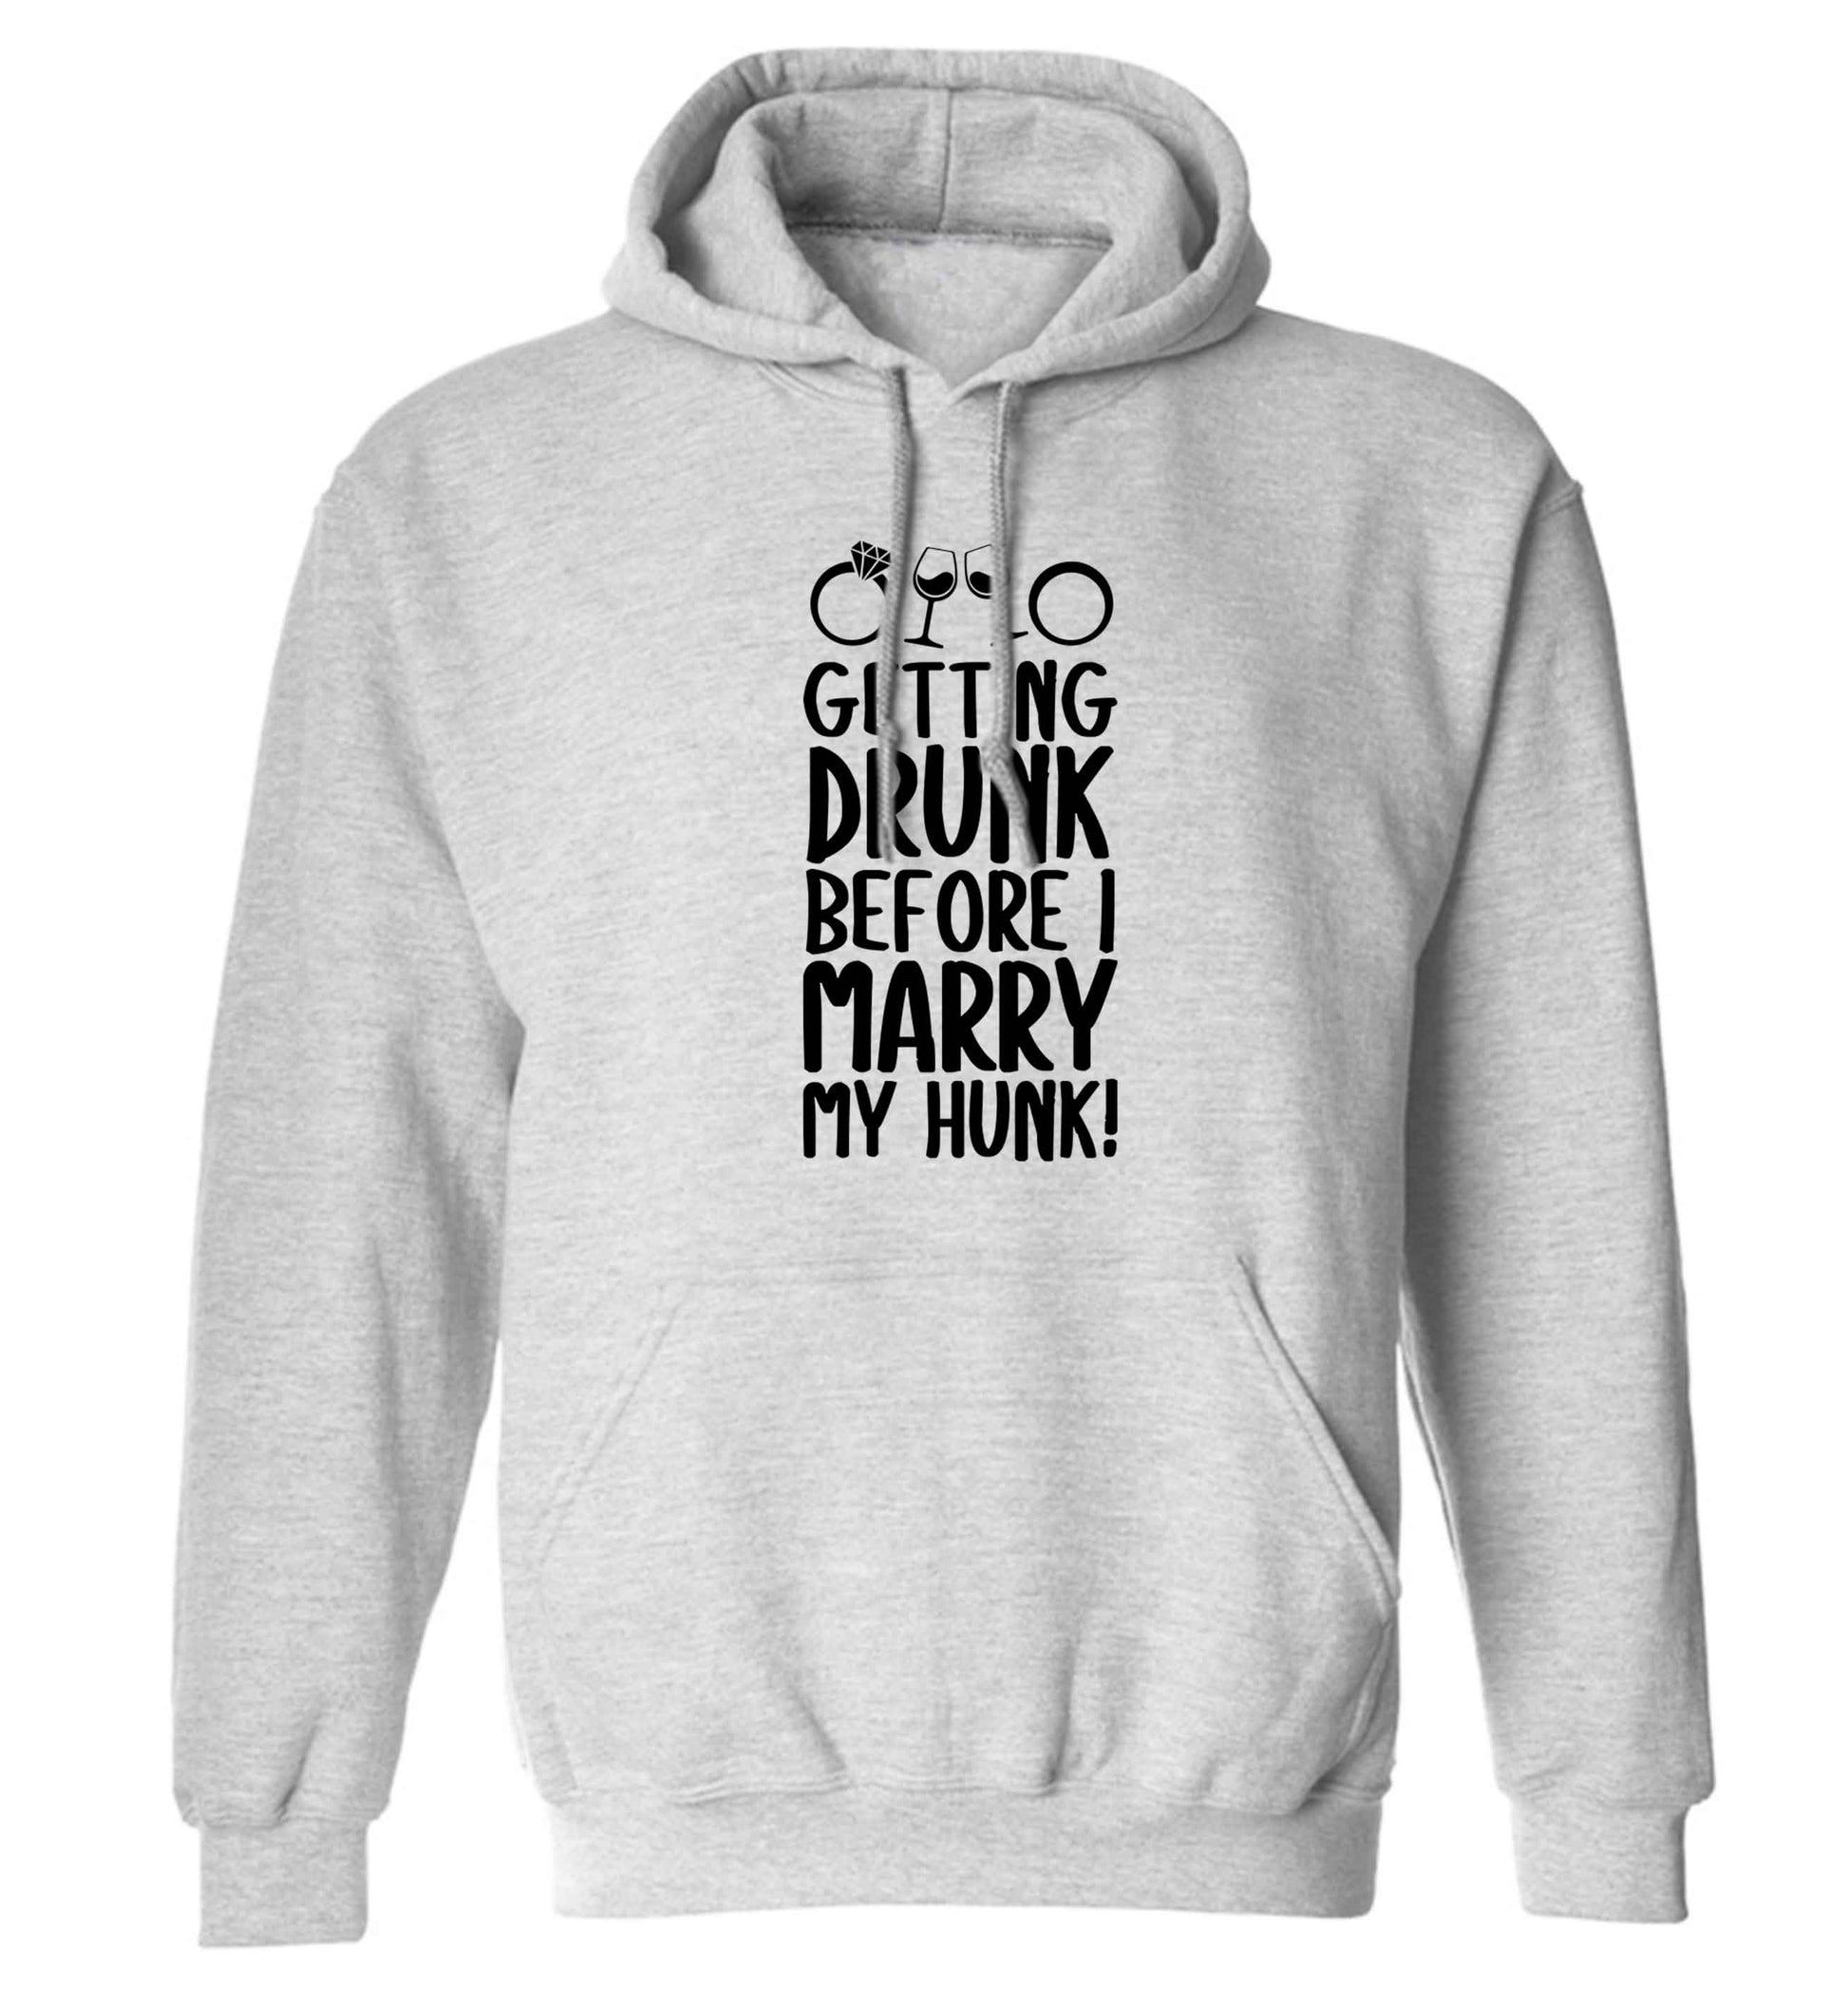 Getting drunk before I marry my hunk adults unisex grey hoodie 2XL